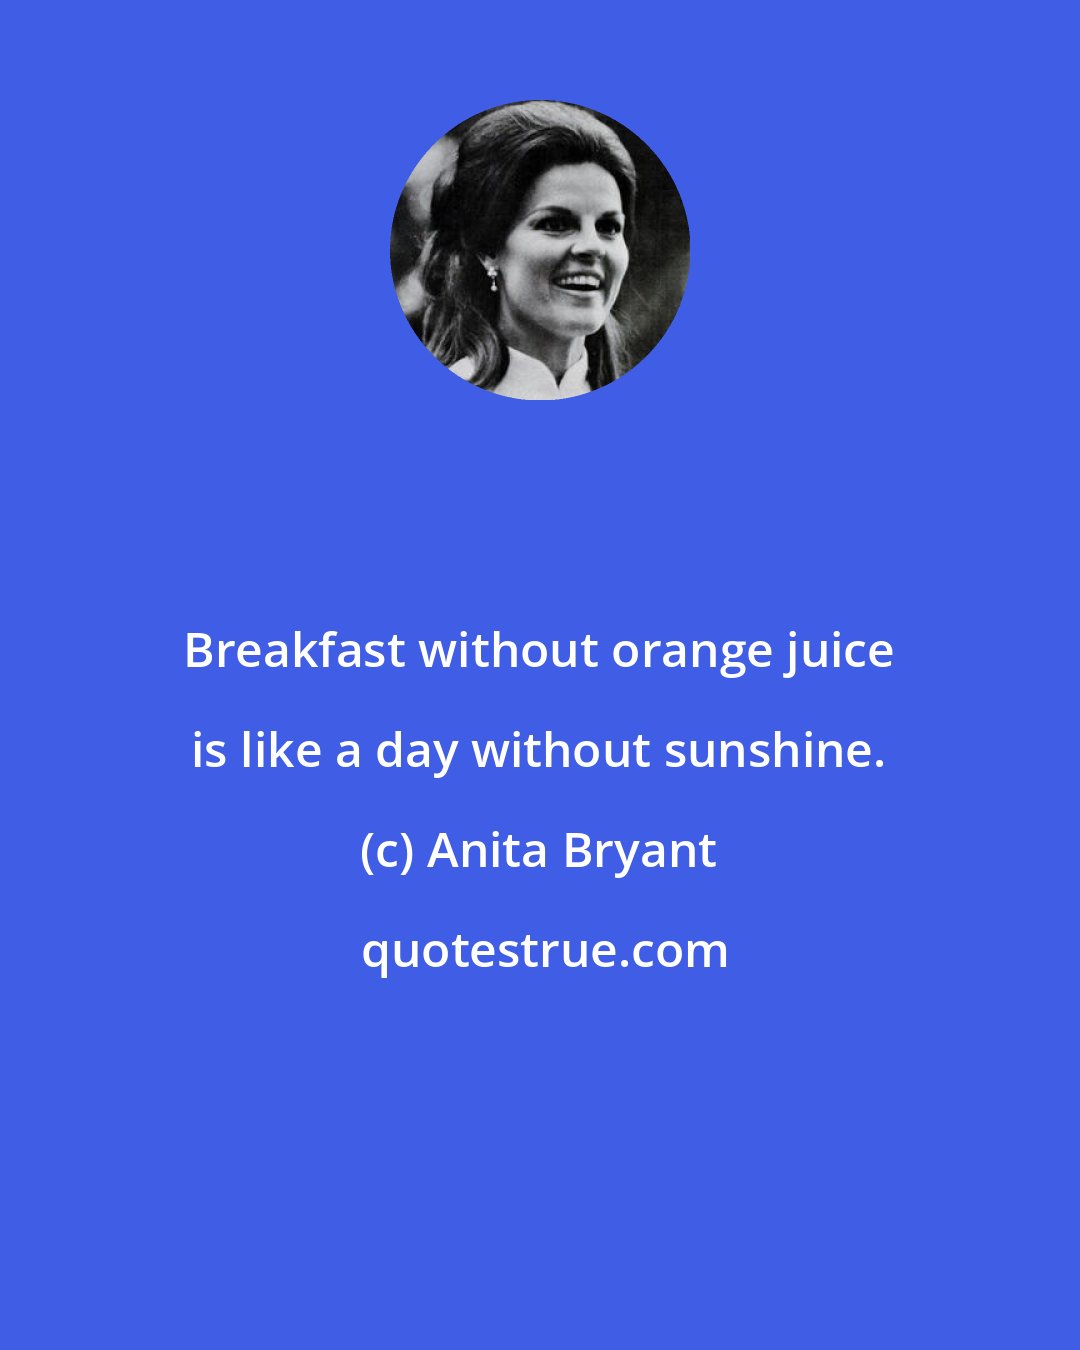 Anita Bryant: Breakfast without orange juice is like a day without sunshine.